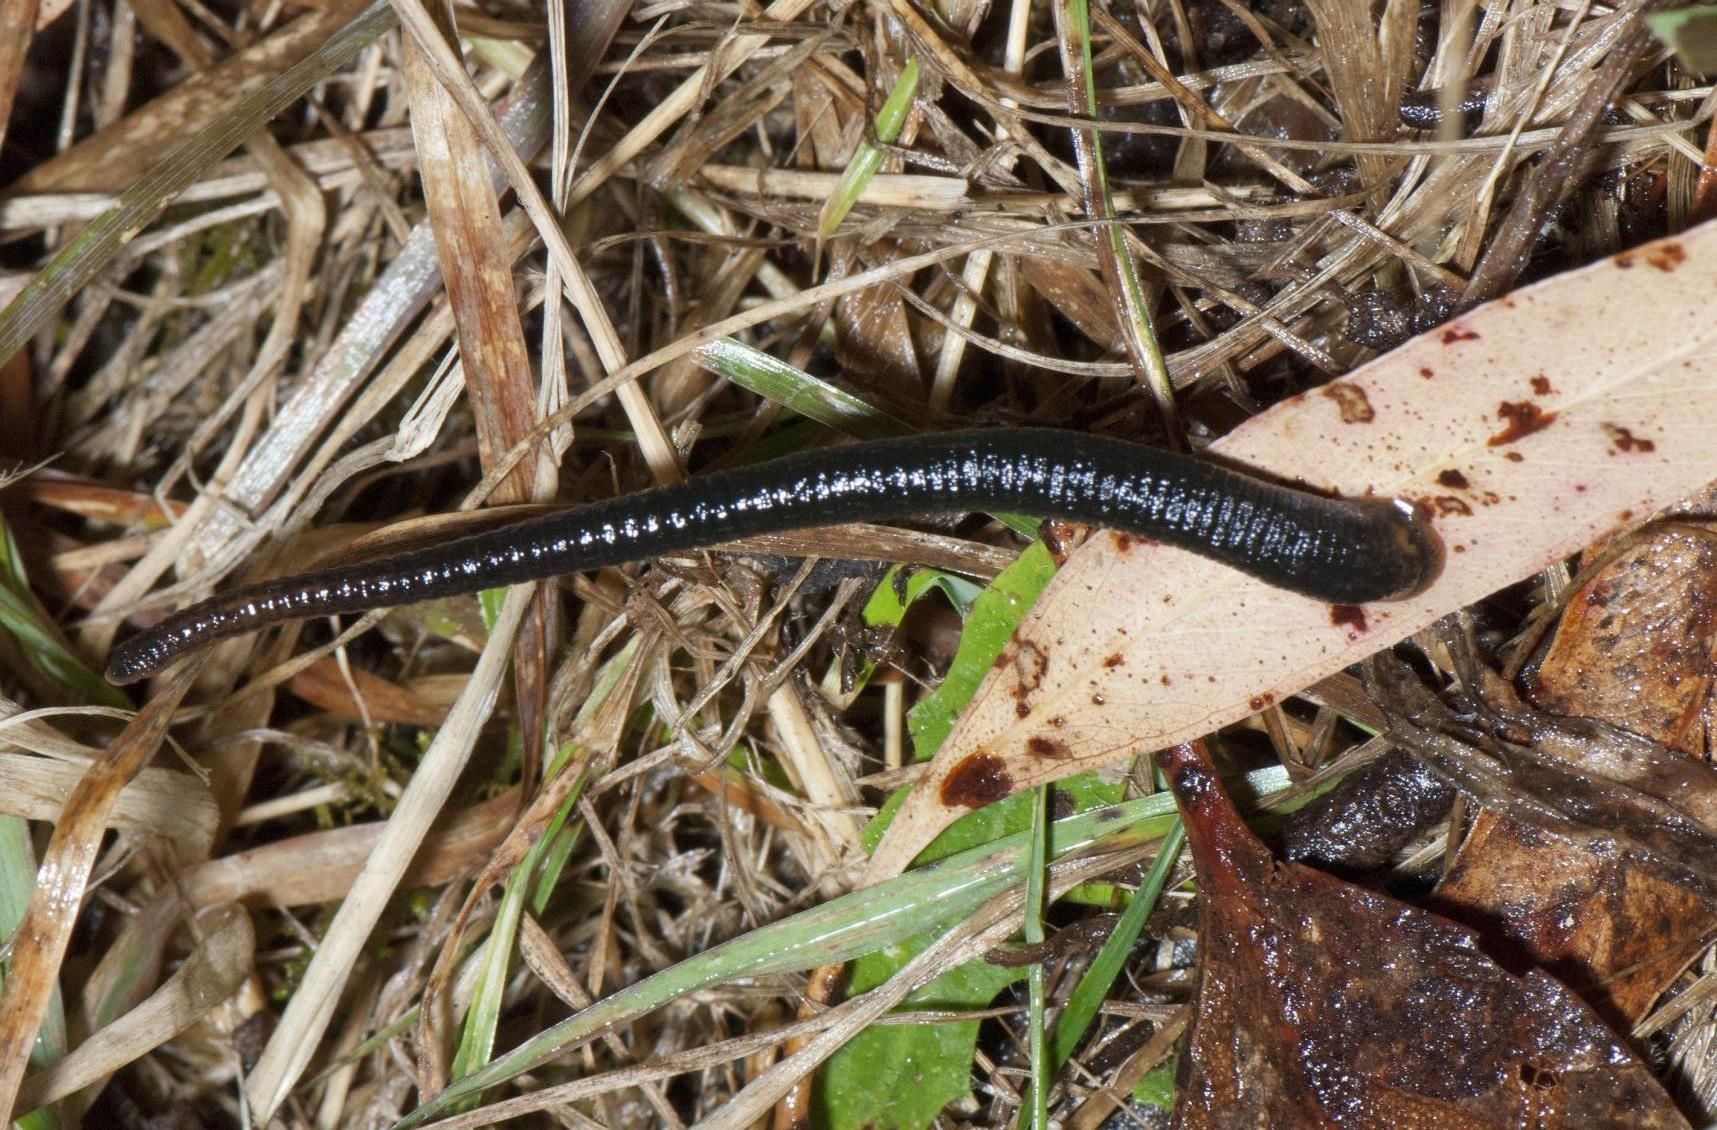 A long, black leech laid on some leaves